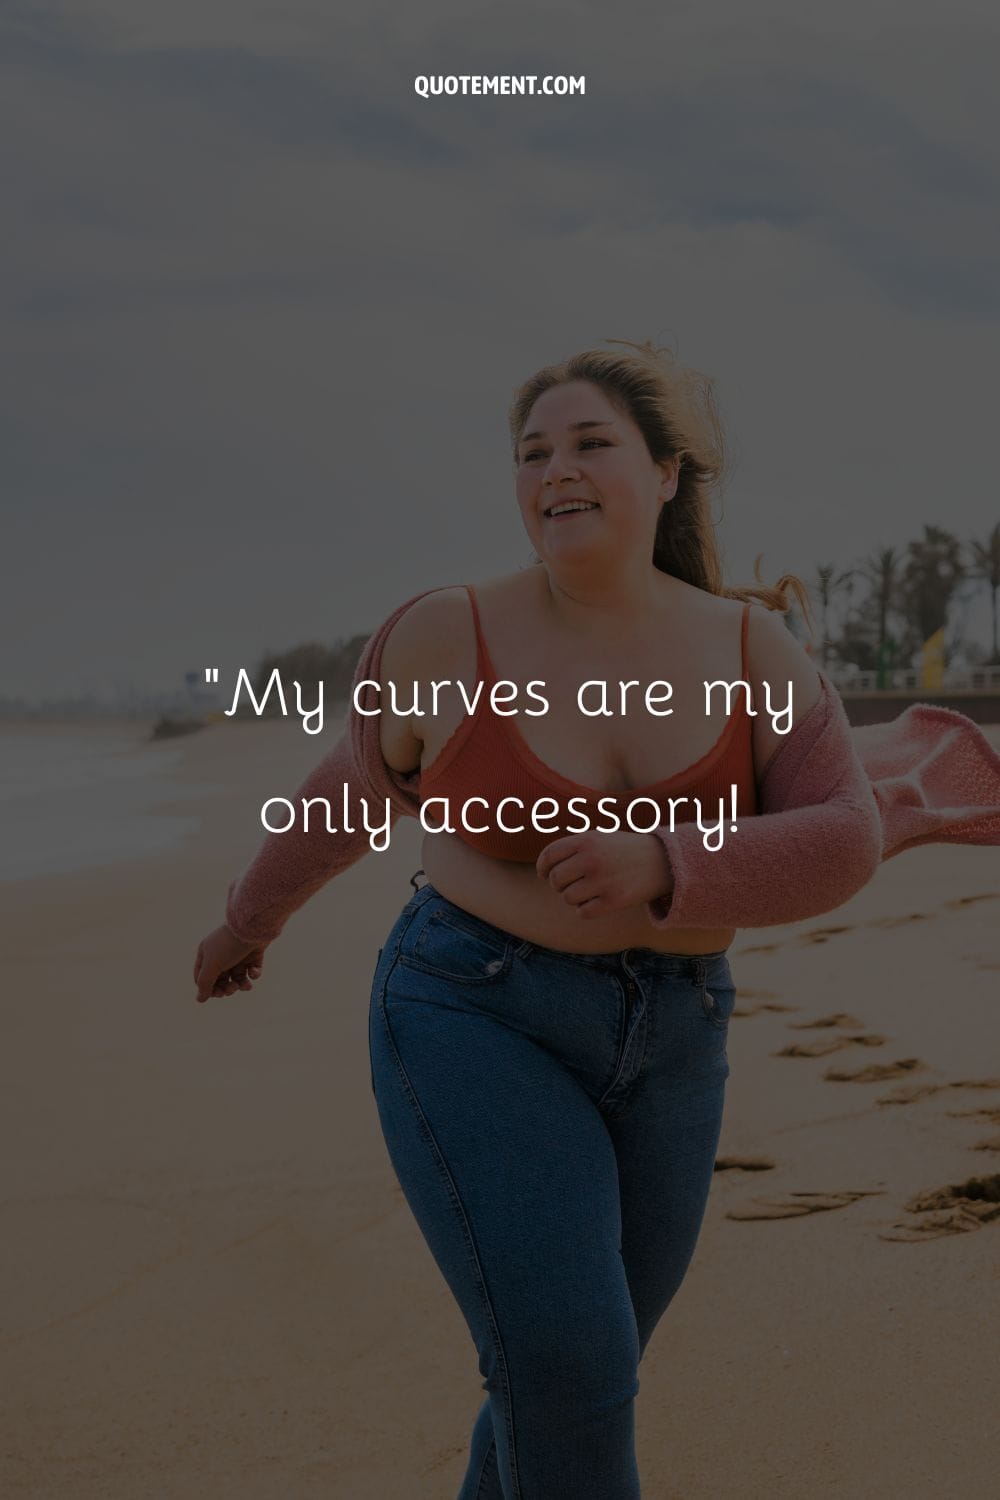 Gorgeous girl representing a caption for chubby girls.